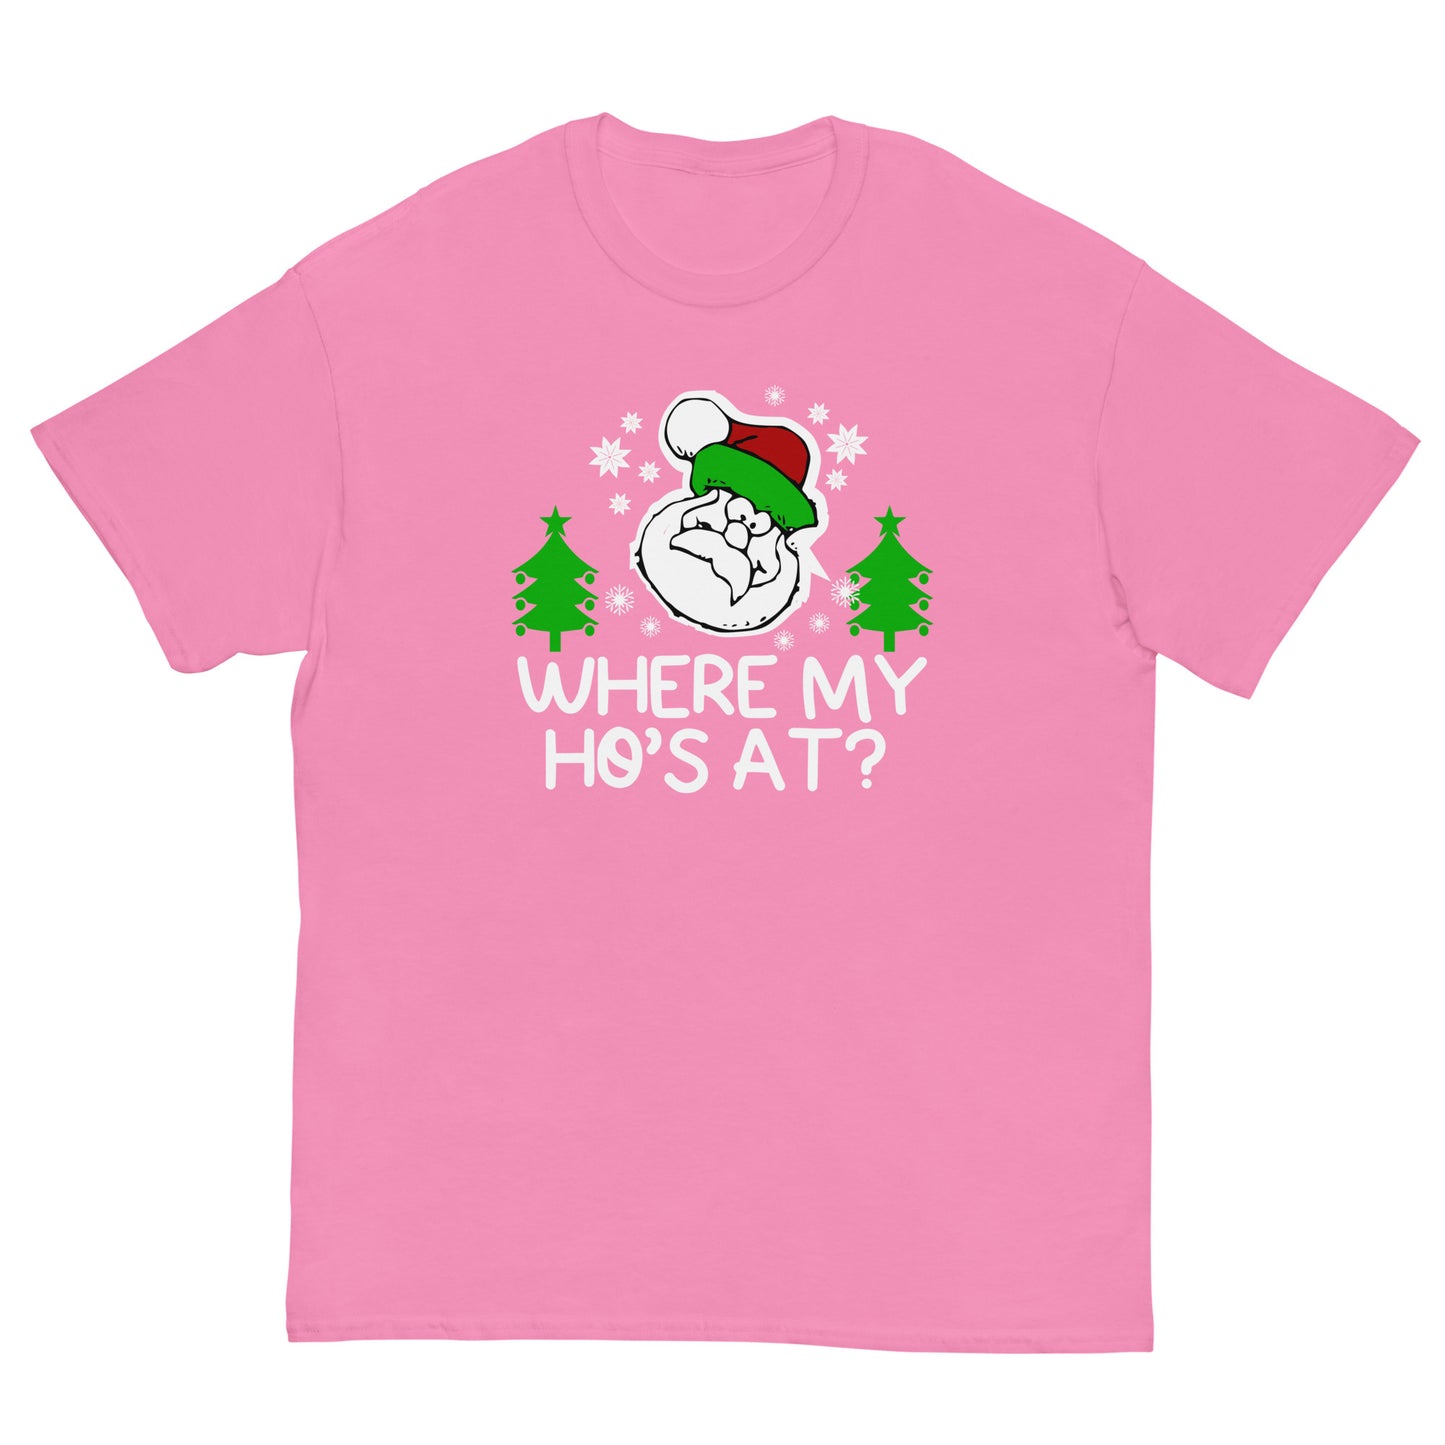 "Where My Ho's At?" Funny Adult Shirt - Weave Got Gifts - Unique Gifts You Won’t Find Anywhere Else!